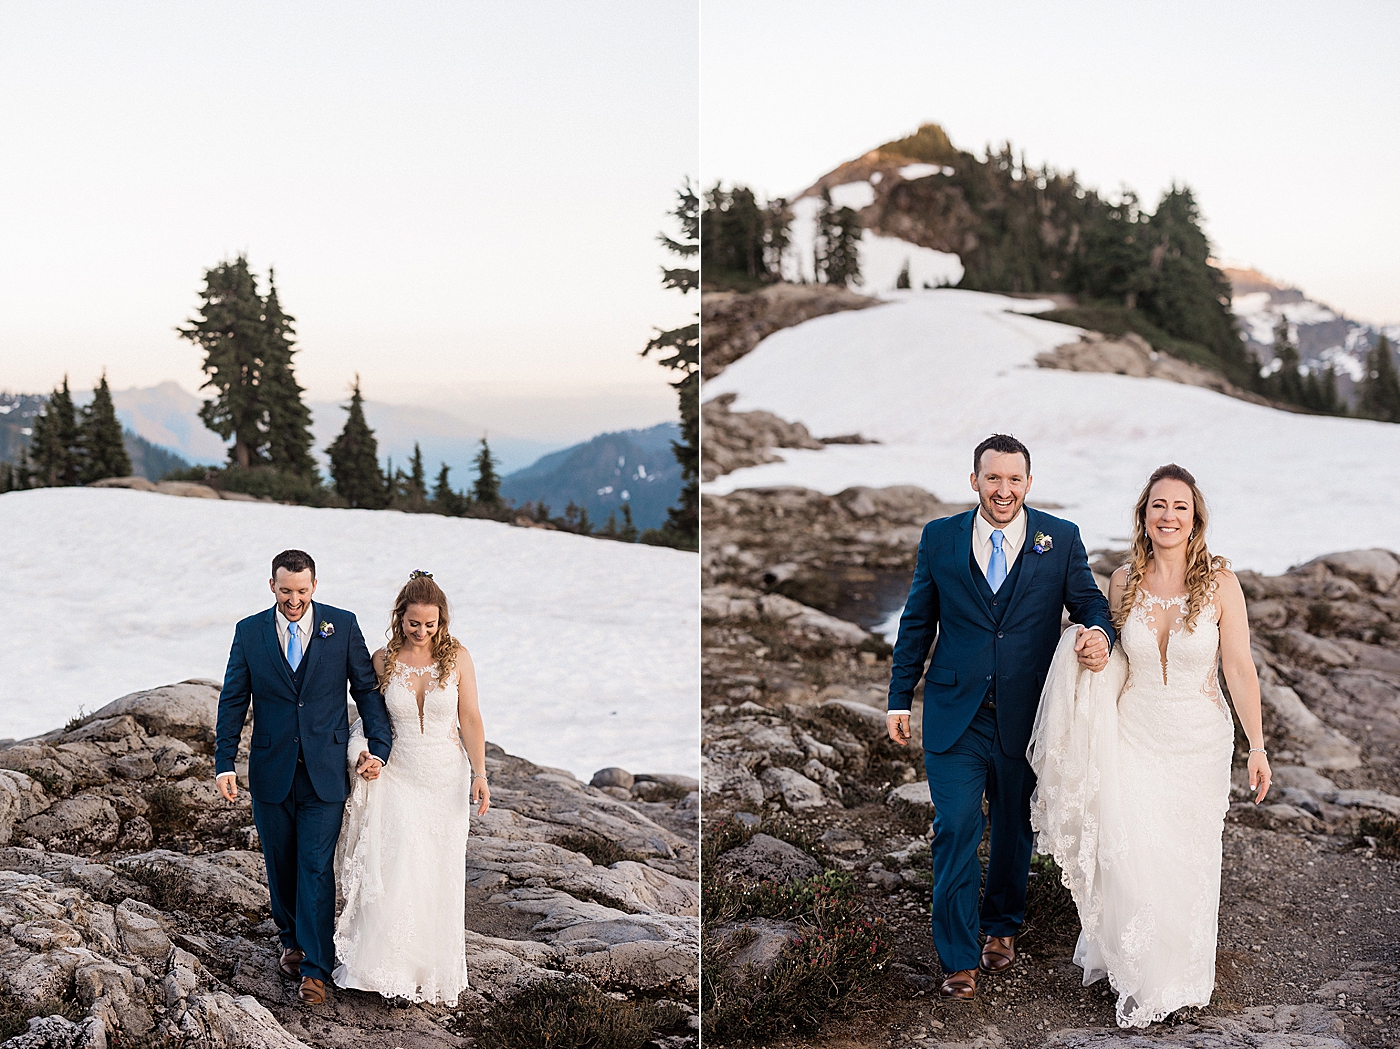 Couple walking along path at Artist Point. Photo by Megan Montalvo Photography.